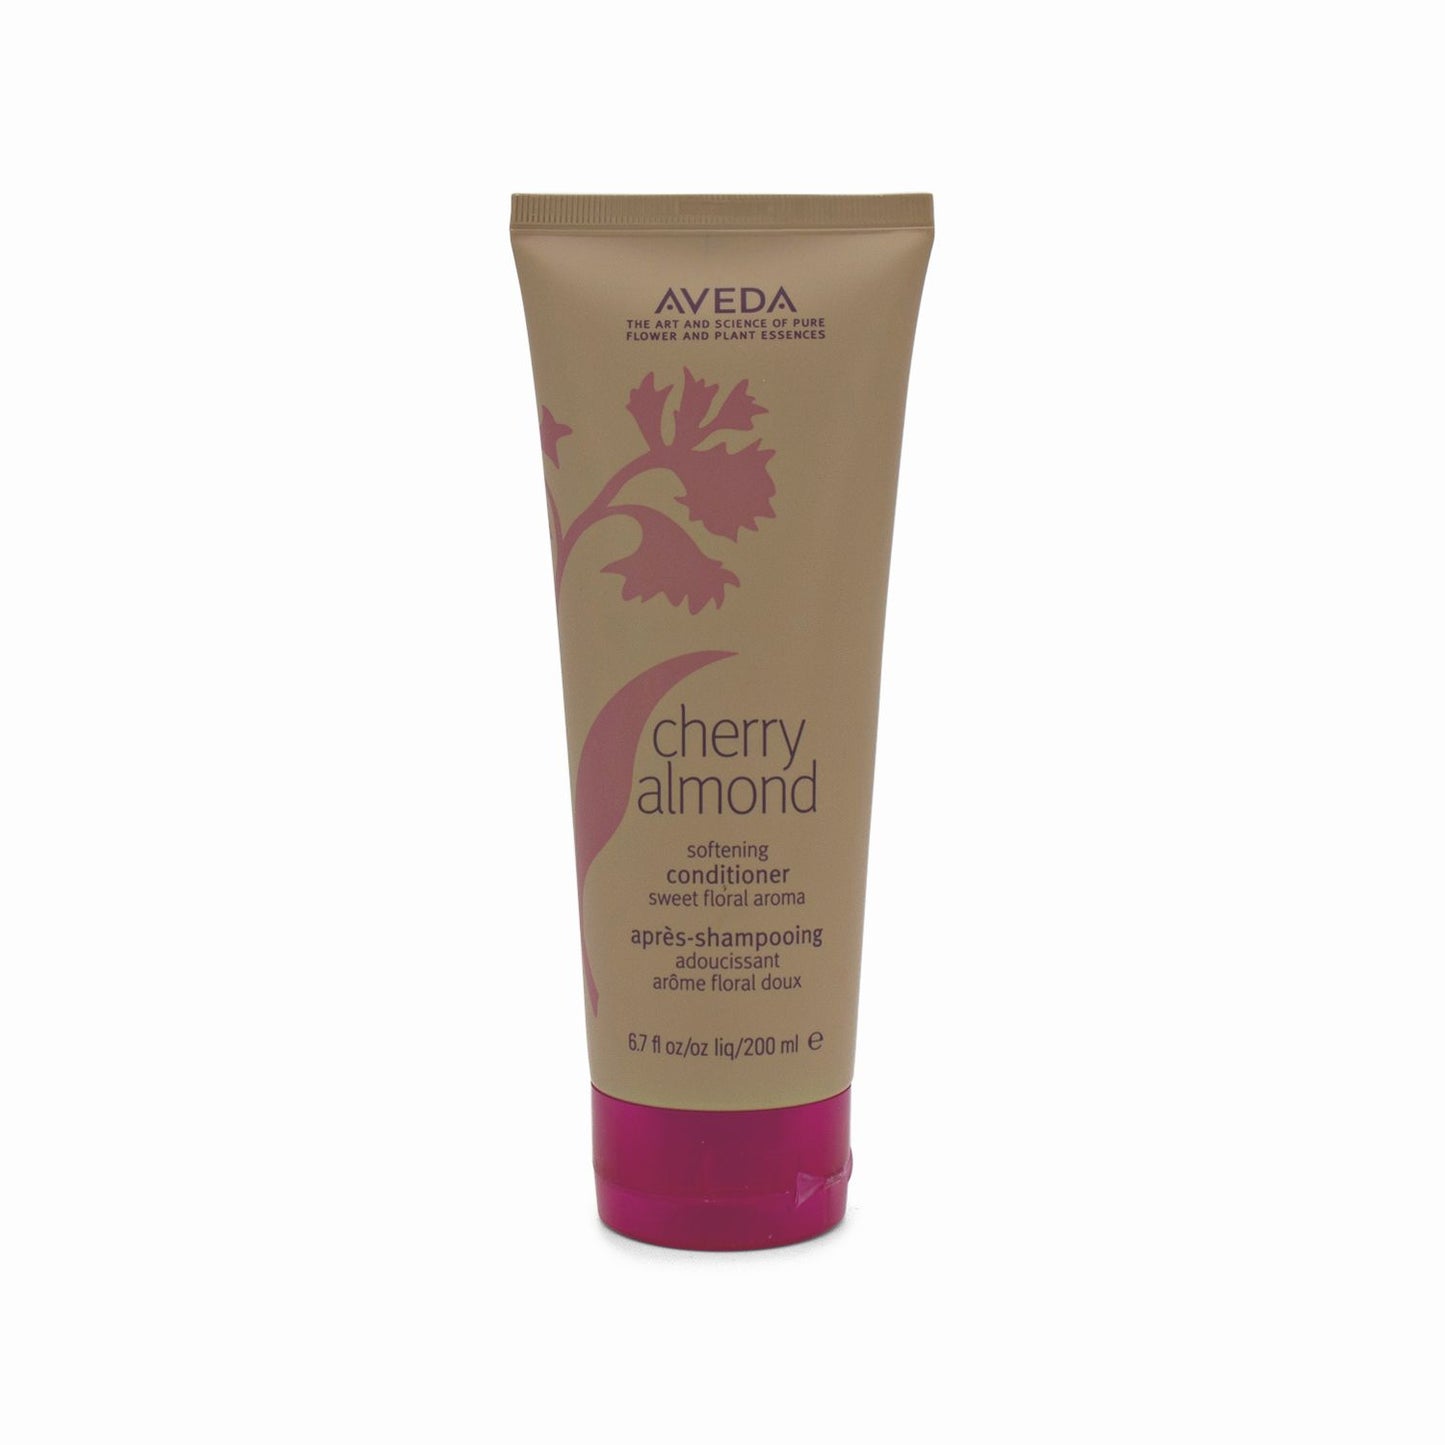 Aveda Cherry Almond Softening Conditioner 200ml - Imperfect Container